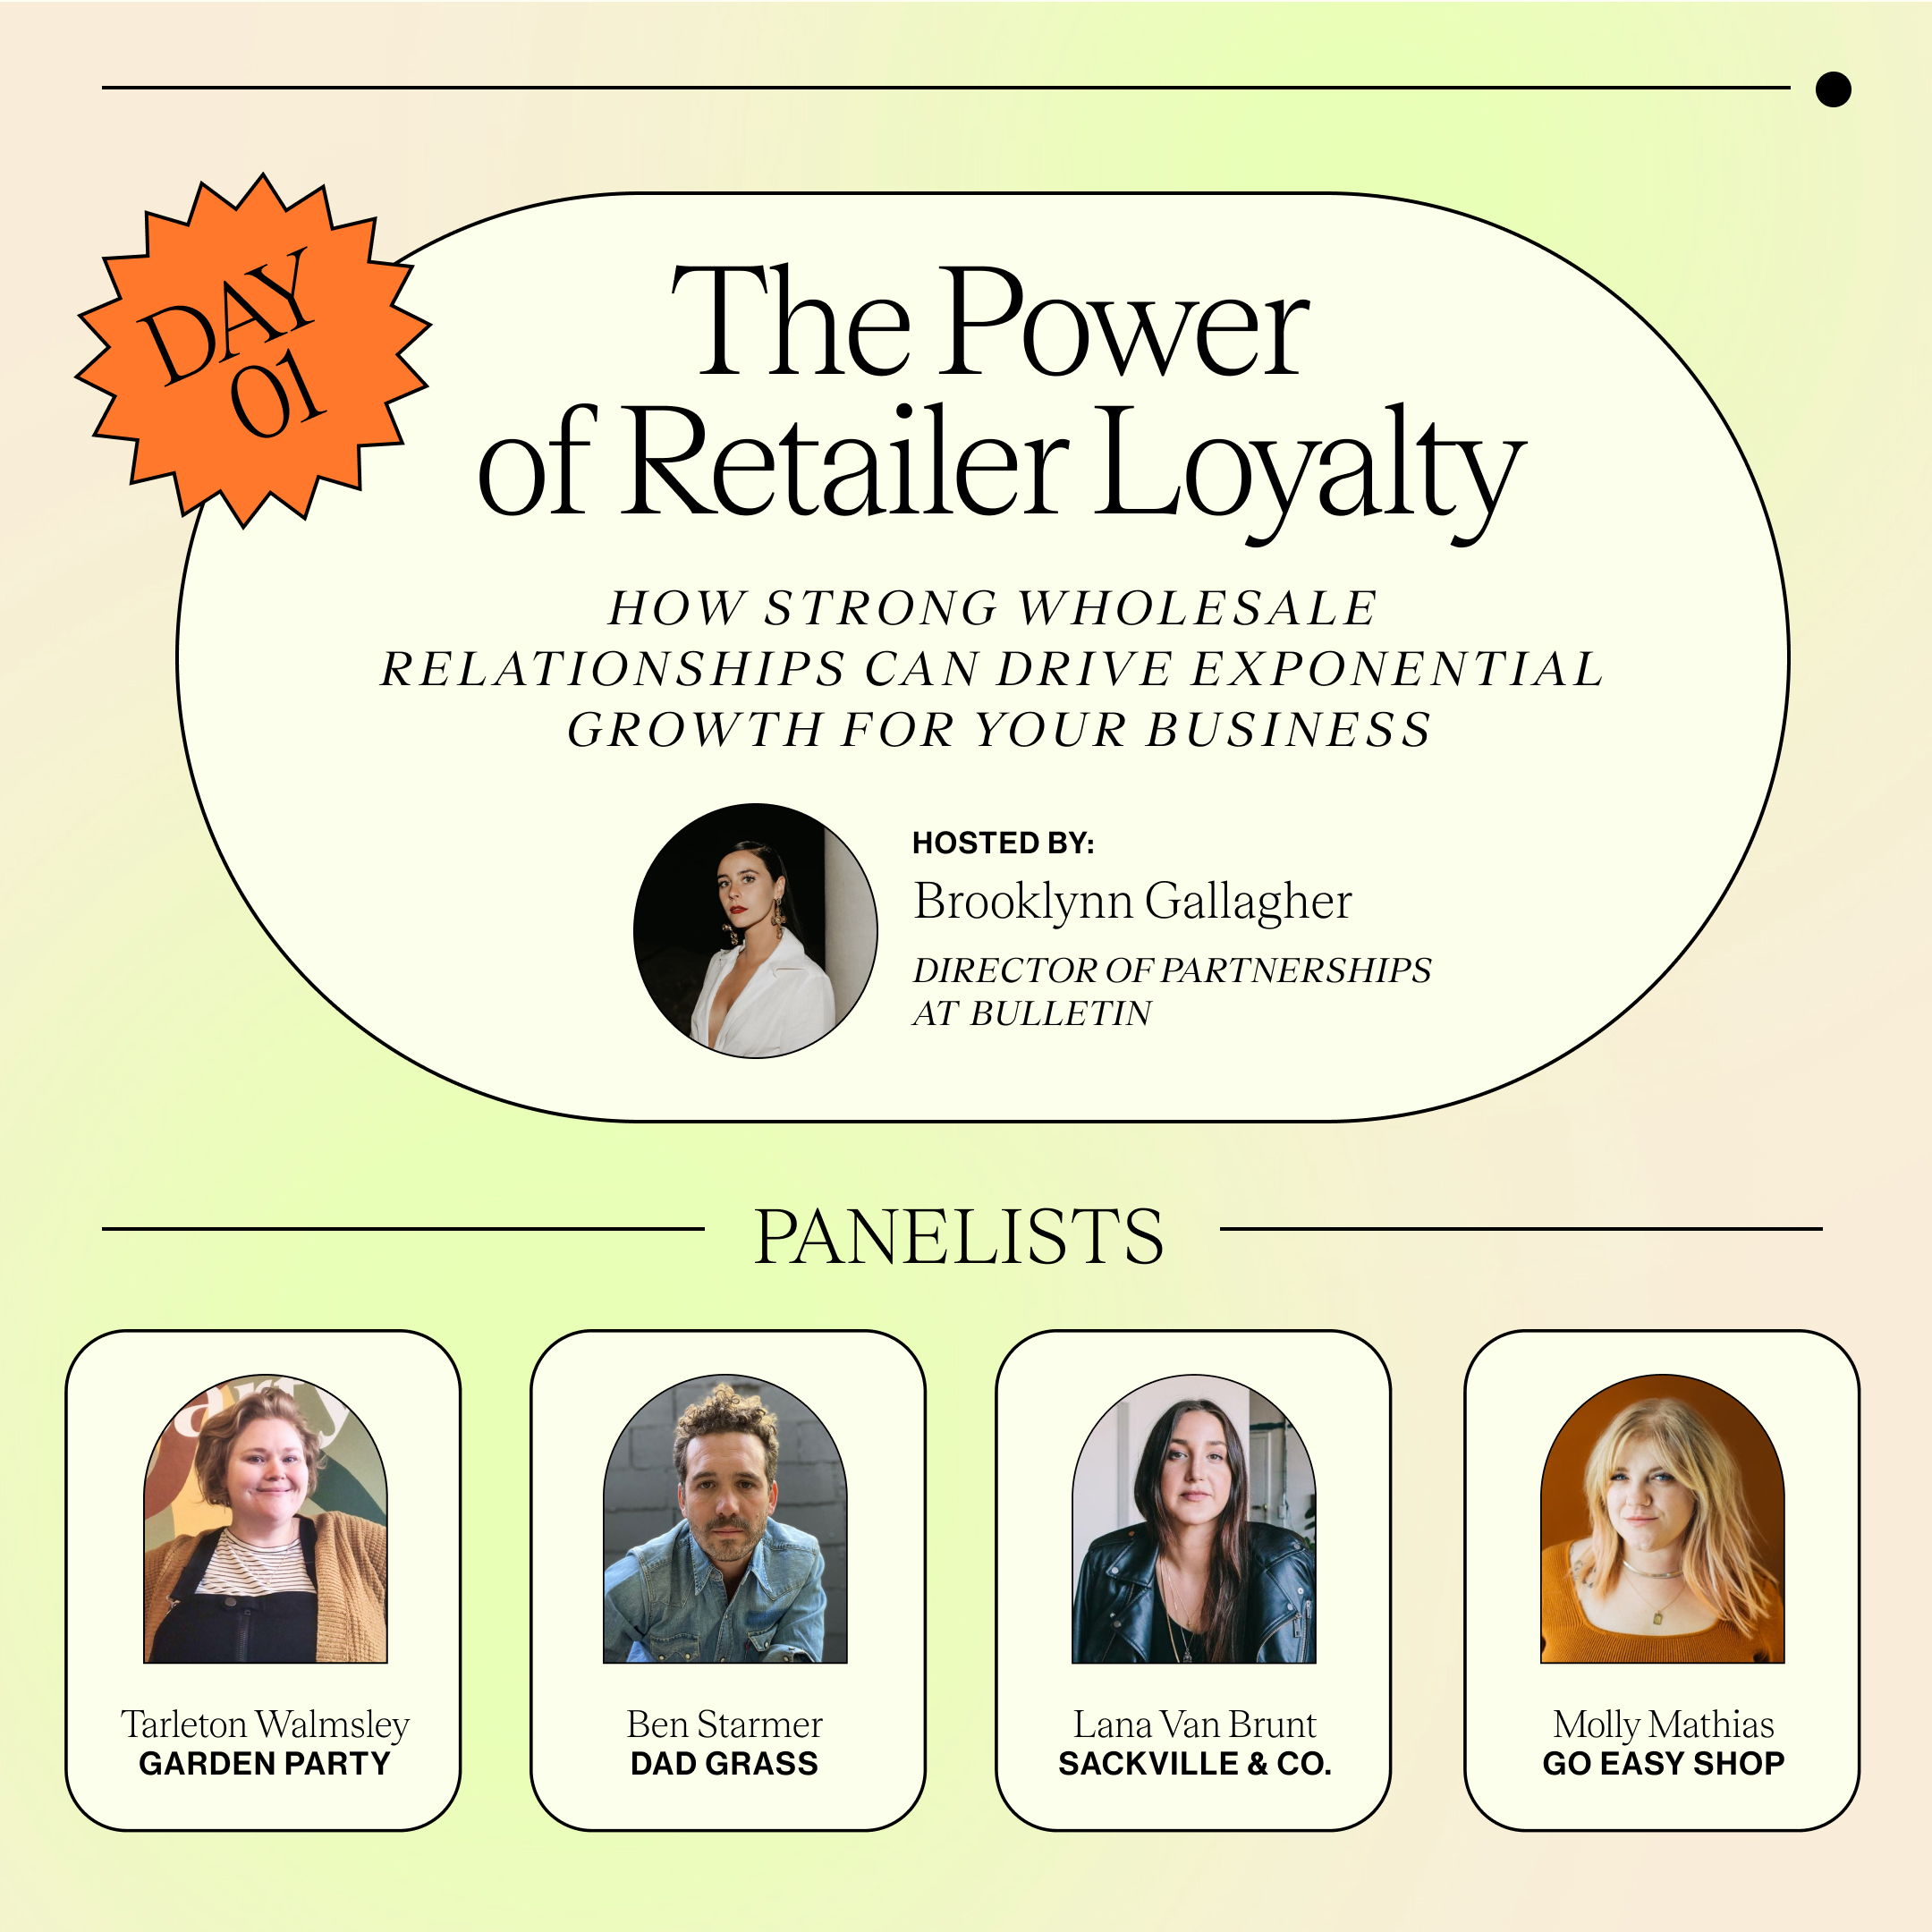 Day 01: The Power of Retailer Loyalty LIVE PANEL